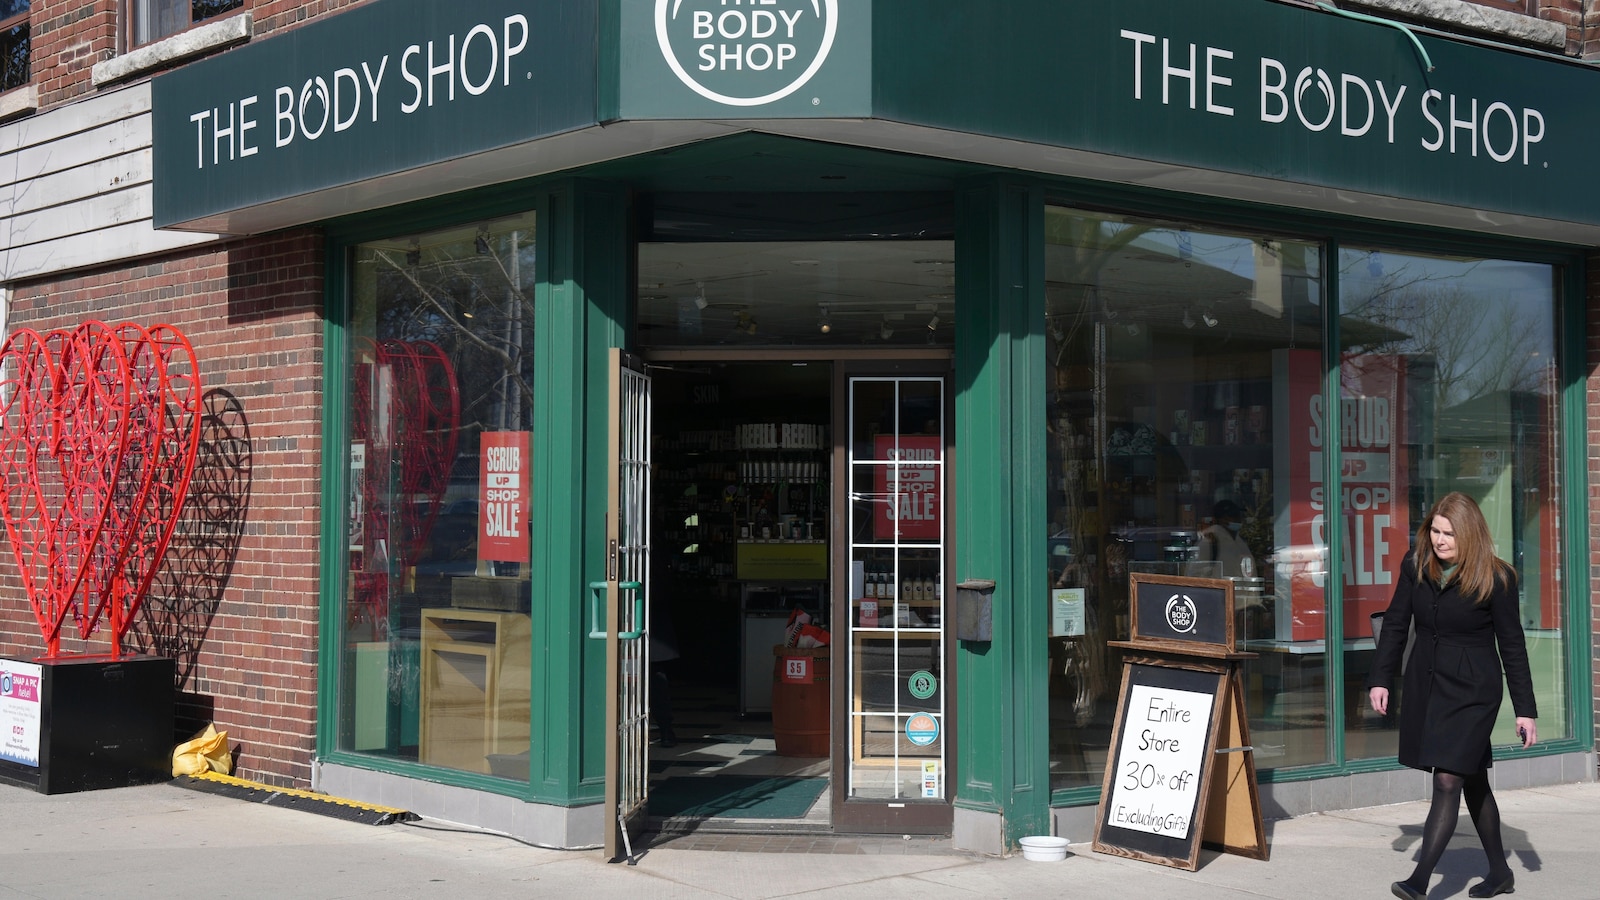 The Body Shop to Close Stores in UK, Canada Following Cease of US Operations